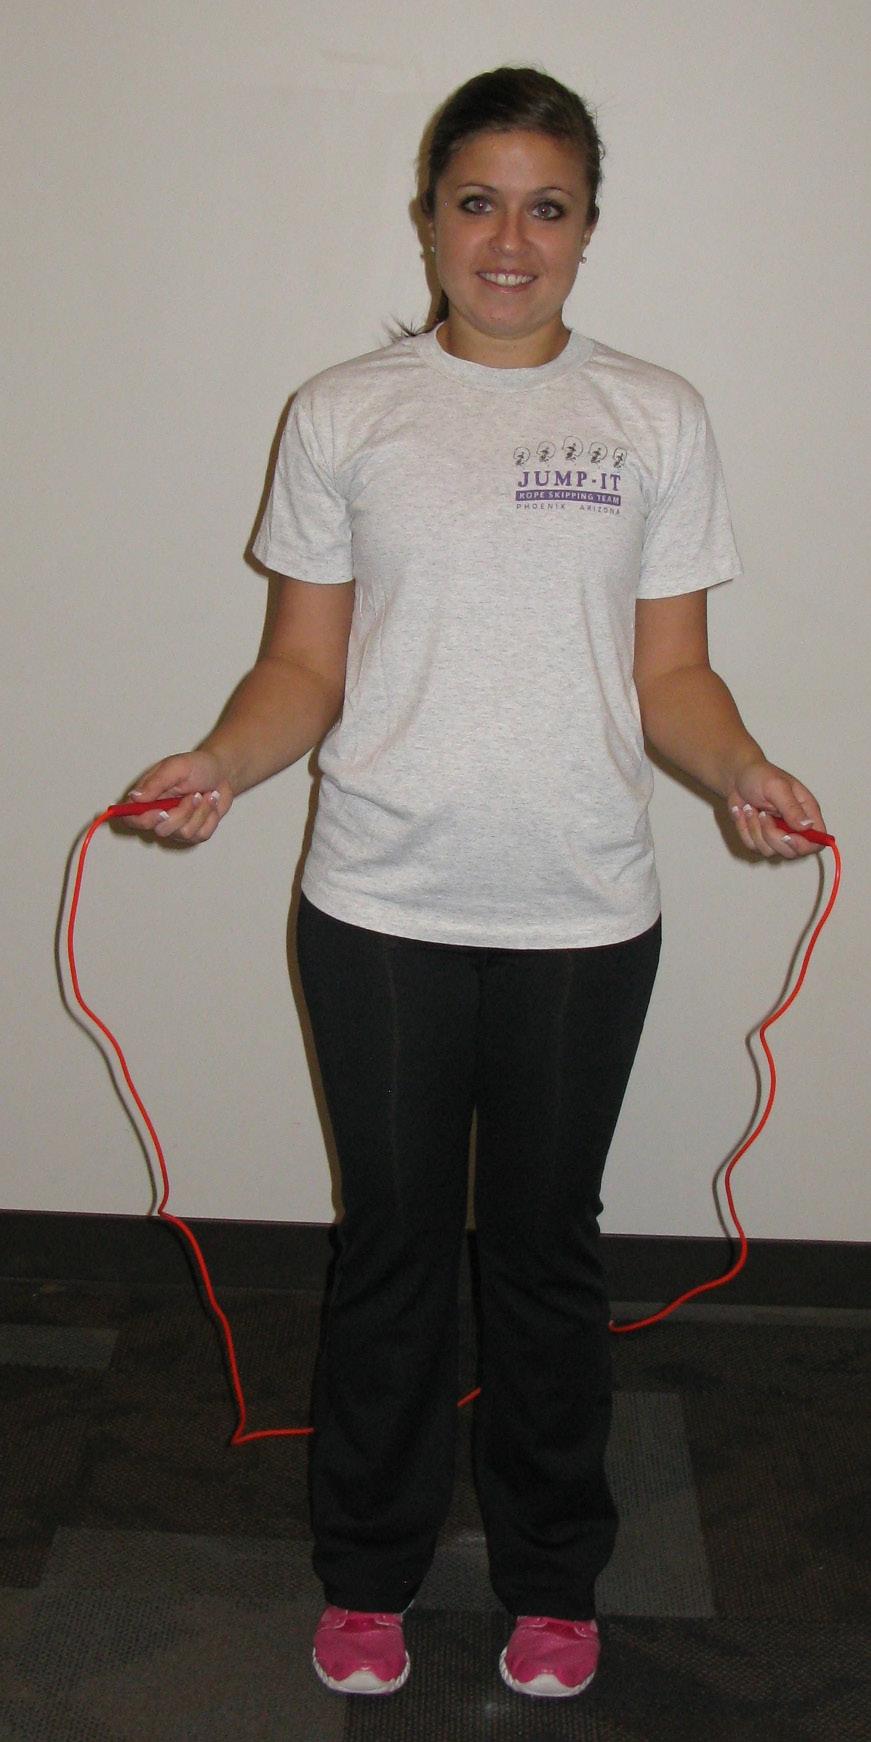 Figure 2. The ready position is marked by the feet being approximately shoulder-width apart and the hands holding the rope handles at roughly the height of the hips.